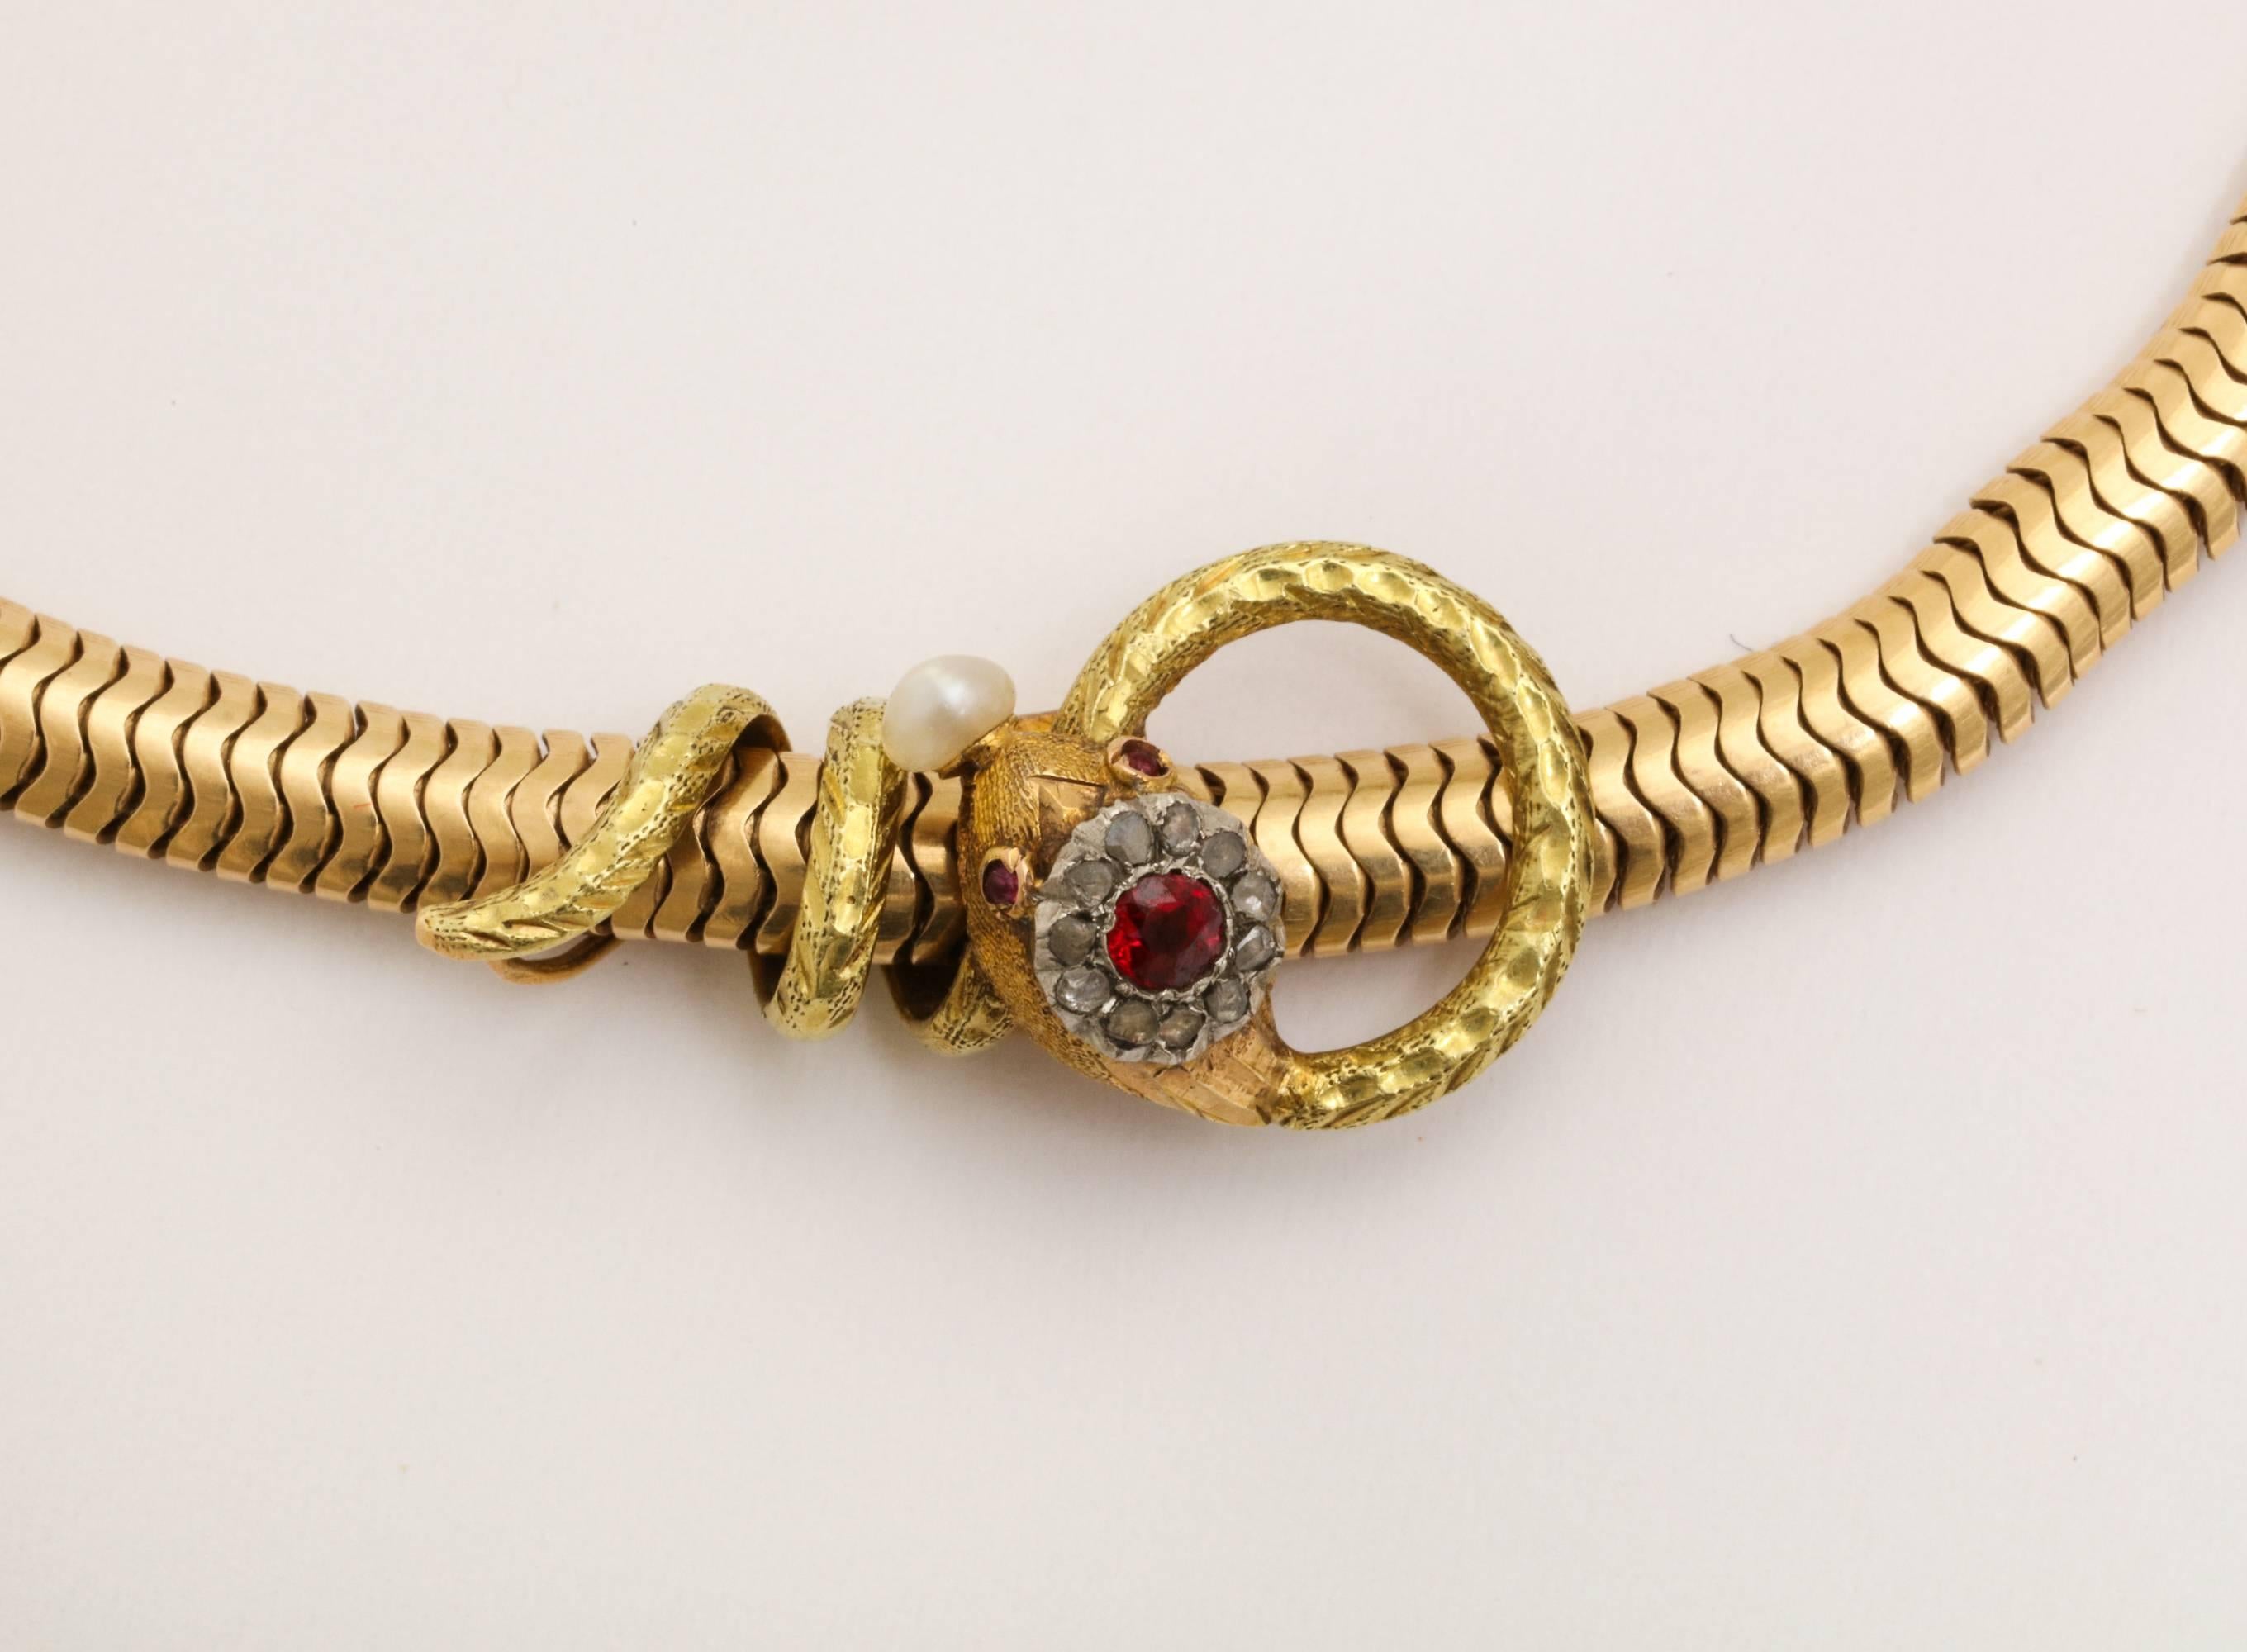 A great example of an Art Deco 18-karat gold snake coiled around a woven 14-karat gold chain. The snake is decorated with a ruby crest and surrounded by mine diamonds with ruby eyes and pearl.